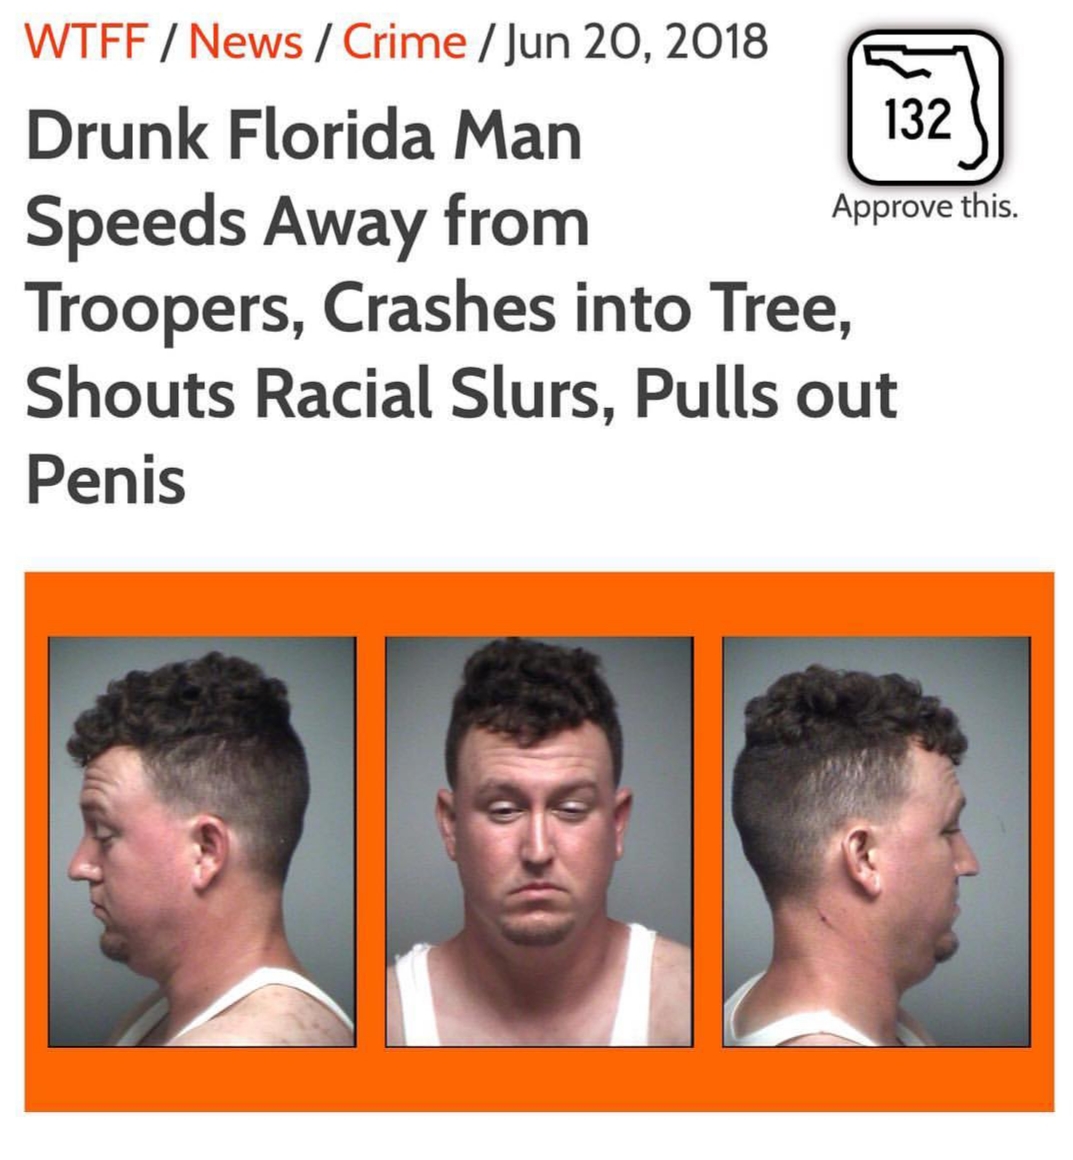 jaw - Approve this. Wtff News Crime Drunk Florida Man Speeds Away from Troopers, Crashes into Tree, Shouts Racial Slurs, Pulls out Penis